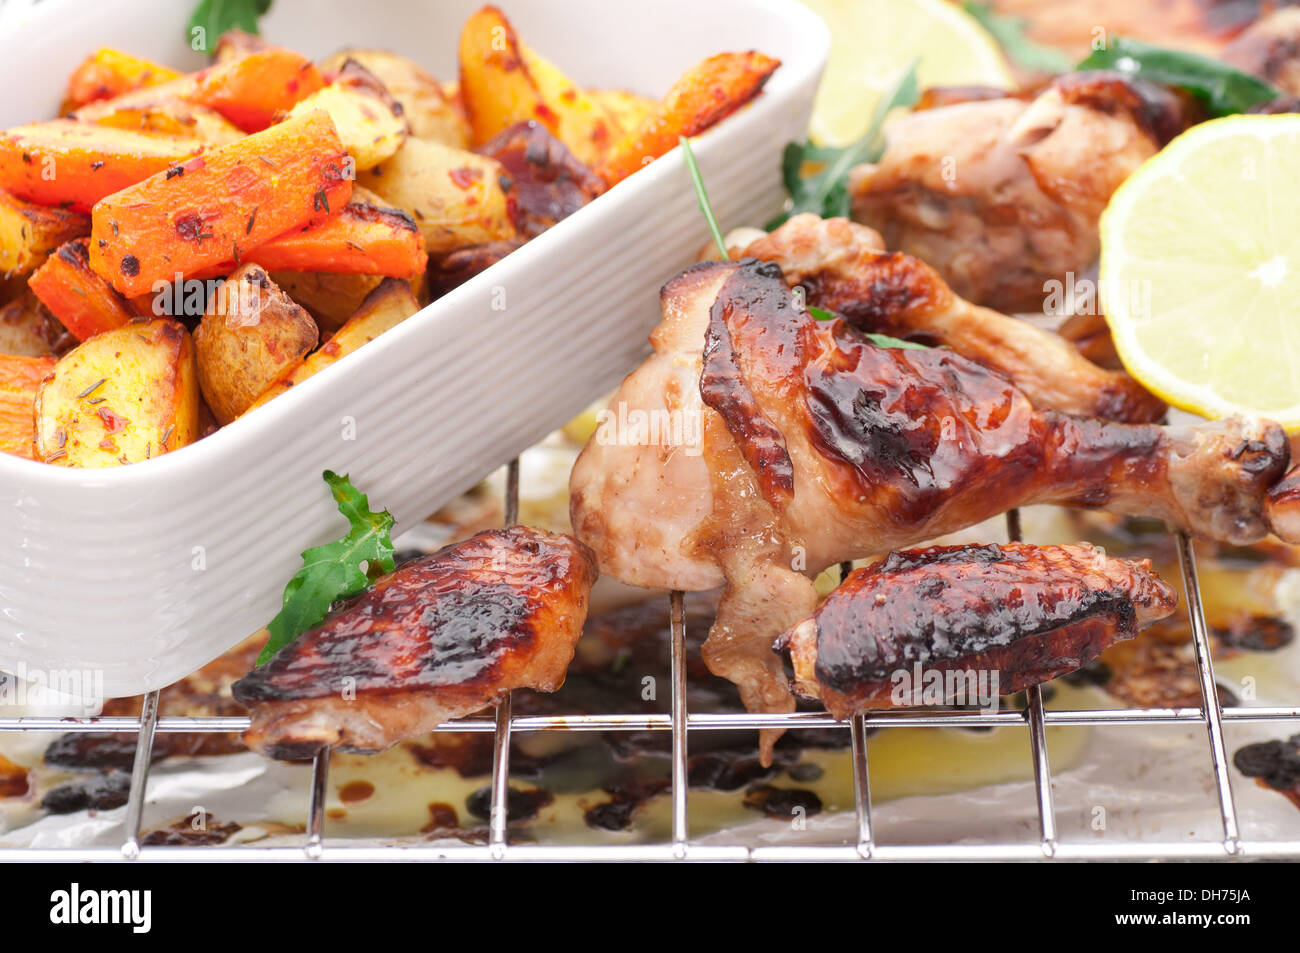 Oven roasted quartered organic chicken. Stock Photo